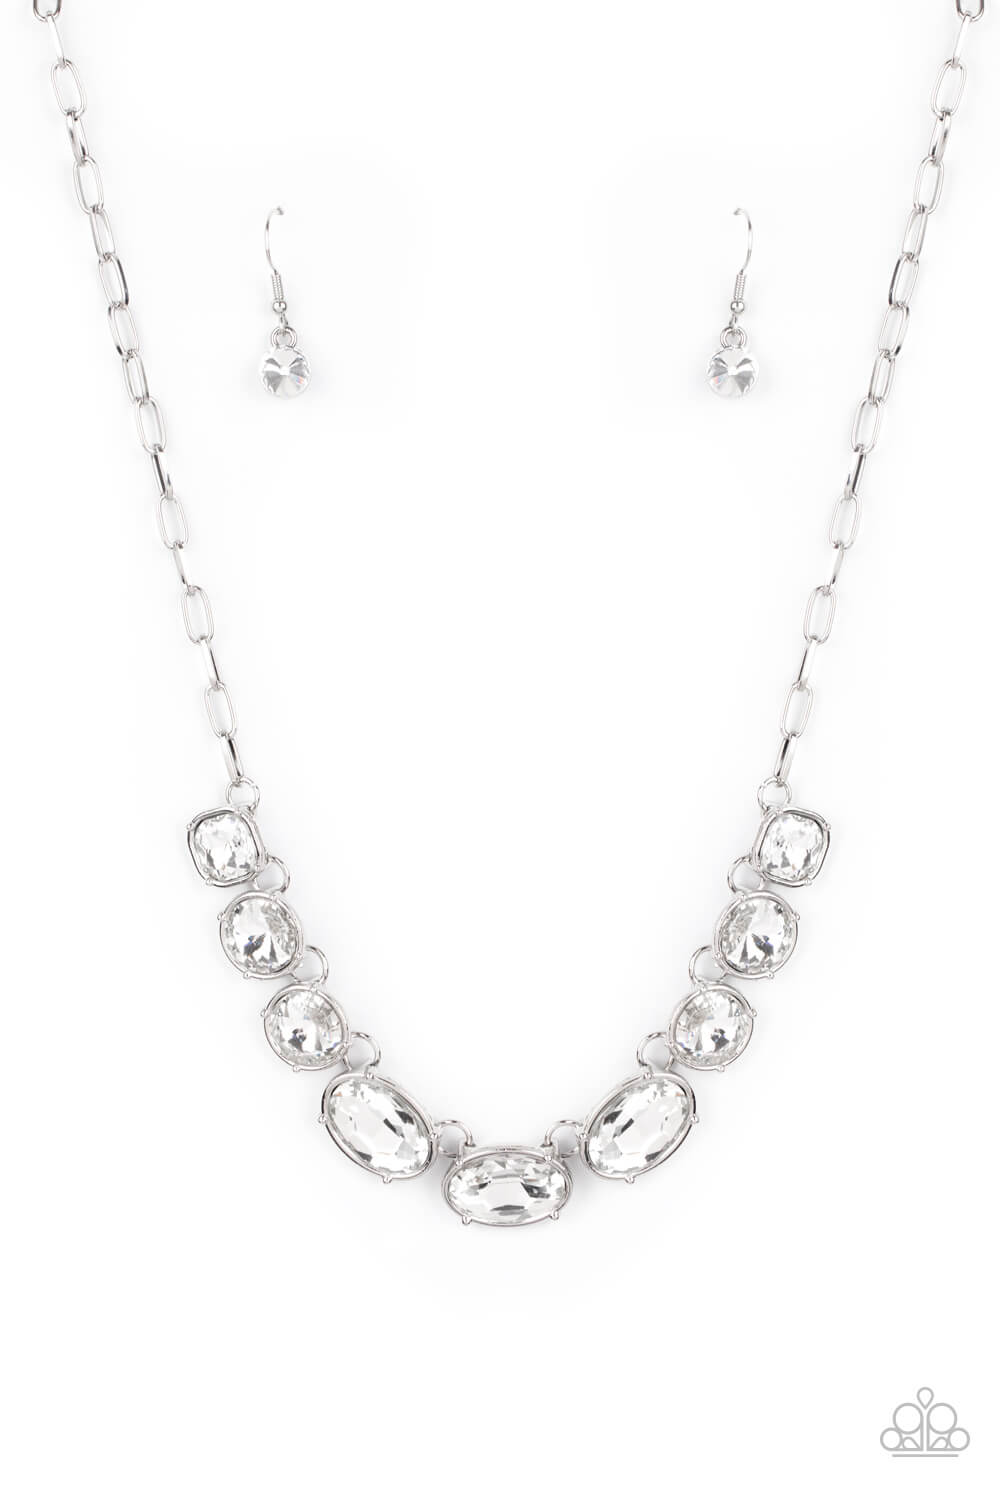 Gorgeously Glacial White Necklace Set June Life of the Party Exclusive - Princess Glam Shop